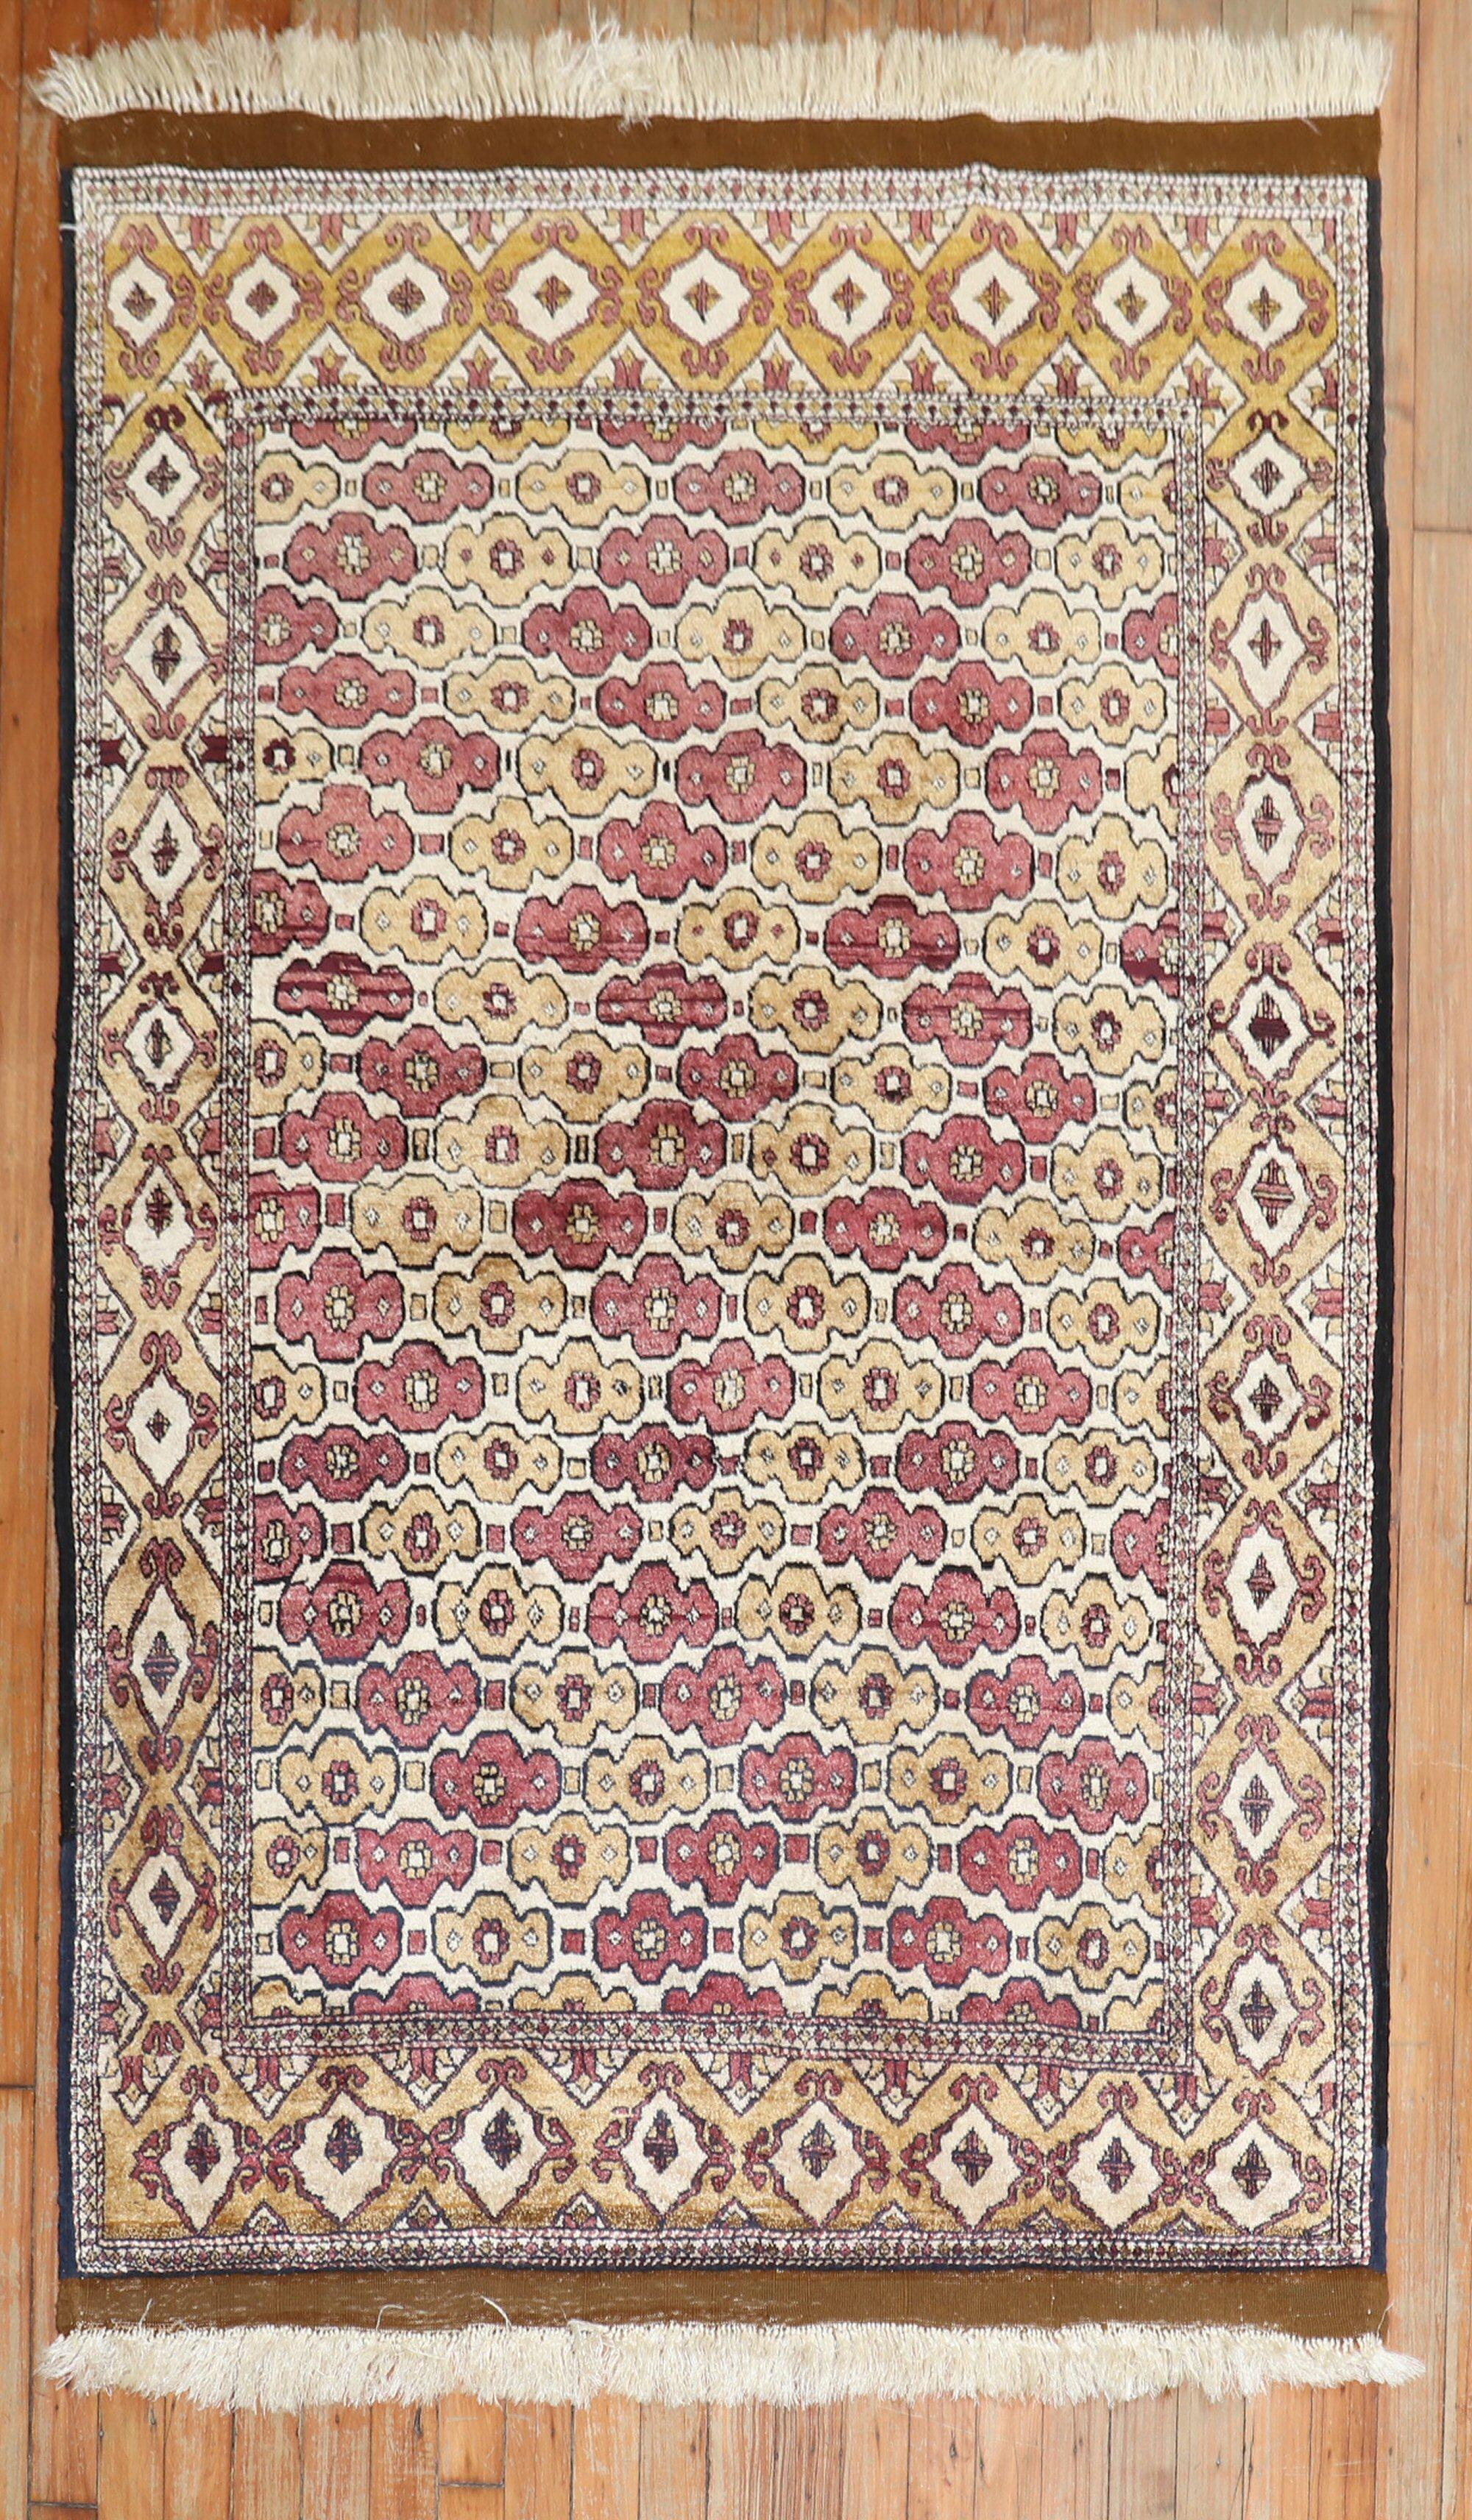 An early 20th century tribal part silk Afghan one-off Rug. Great piece to walk on!.

Measures: 3.9'' x 6.2''.